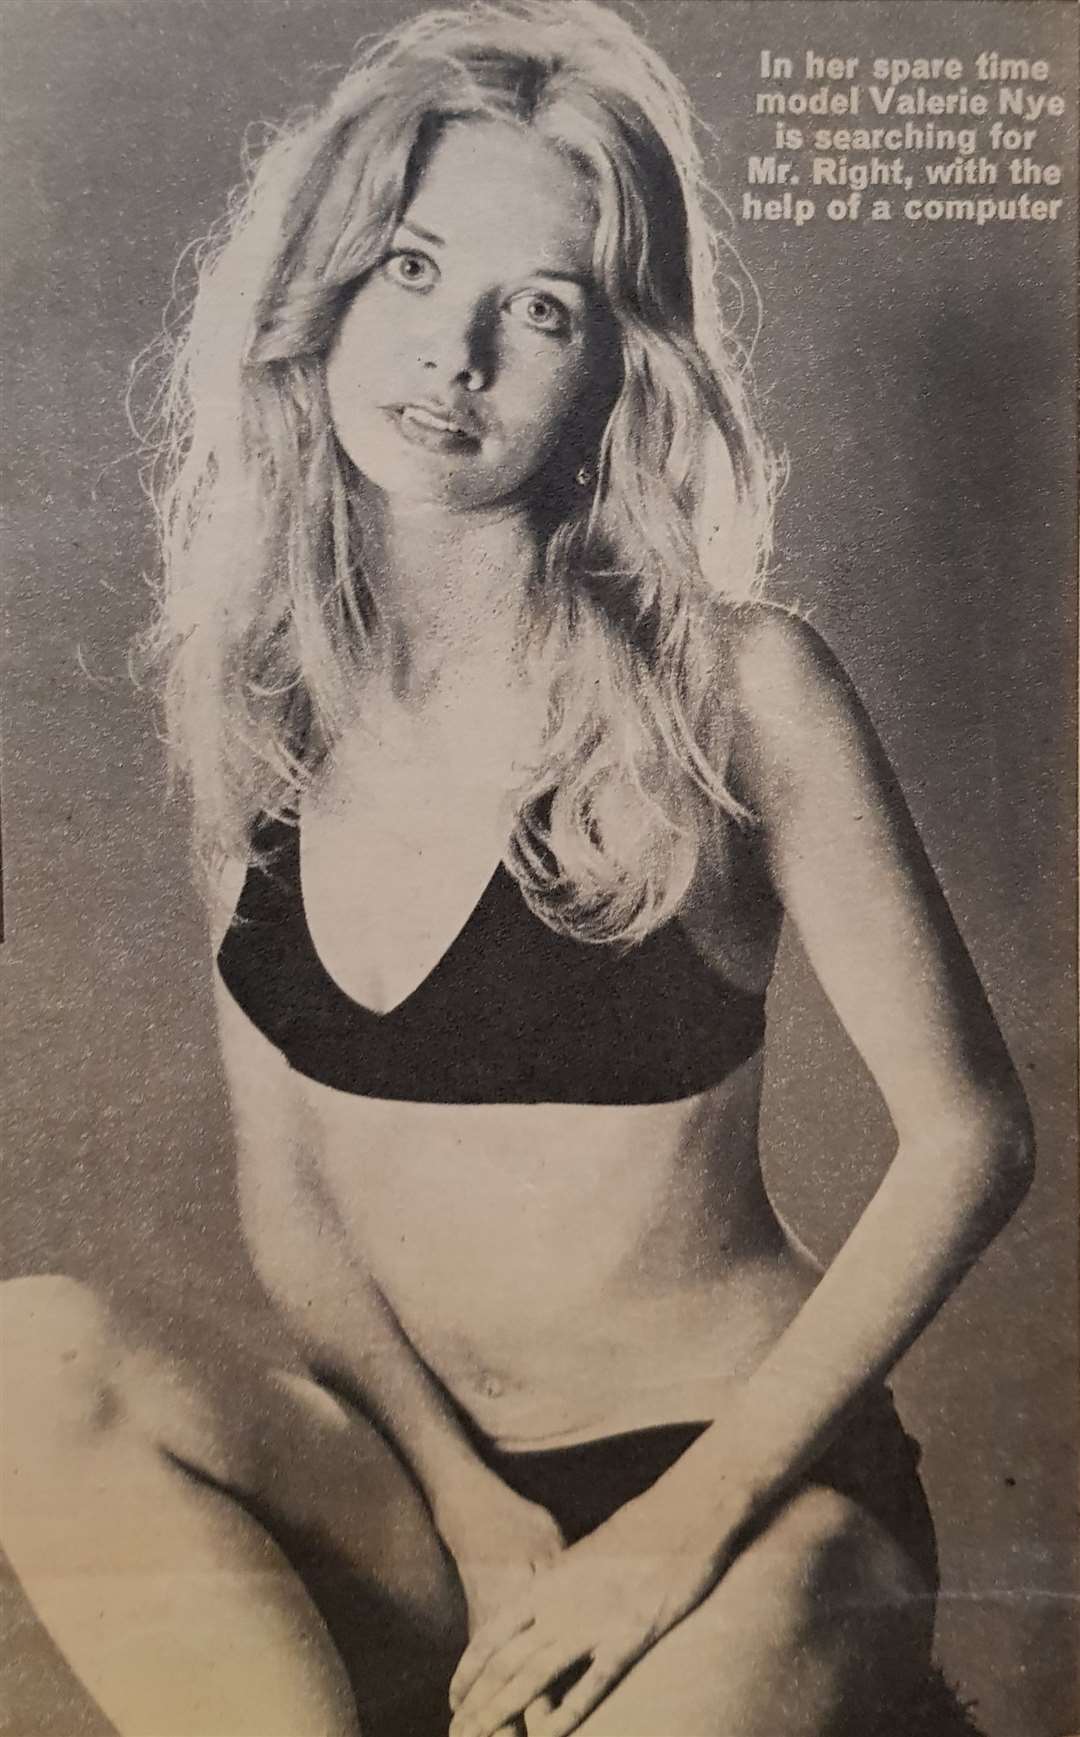 In her modelling days